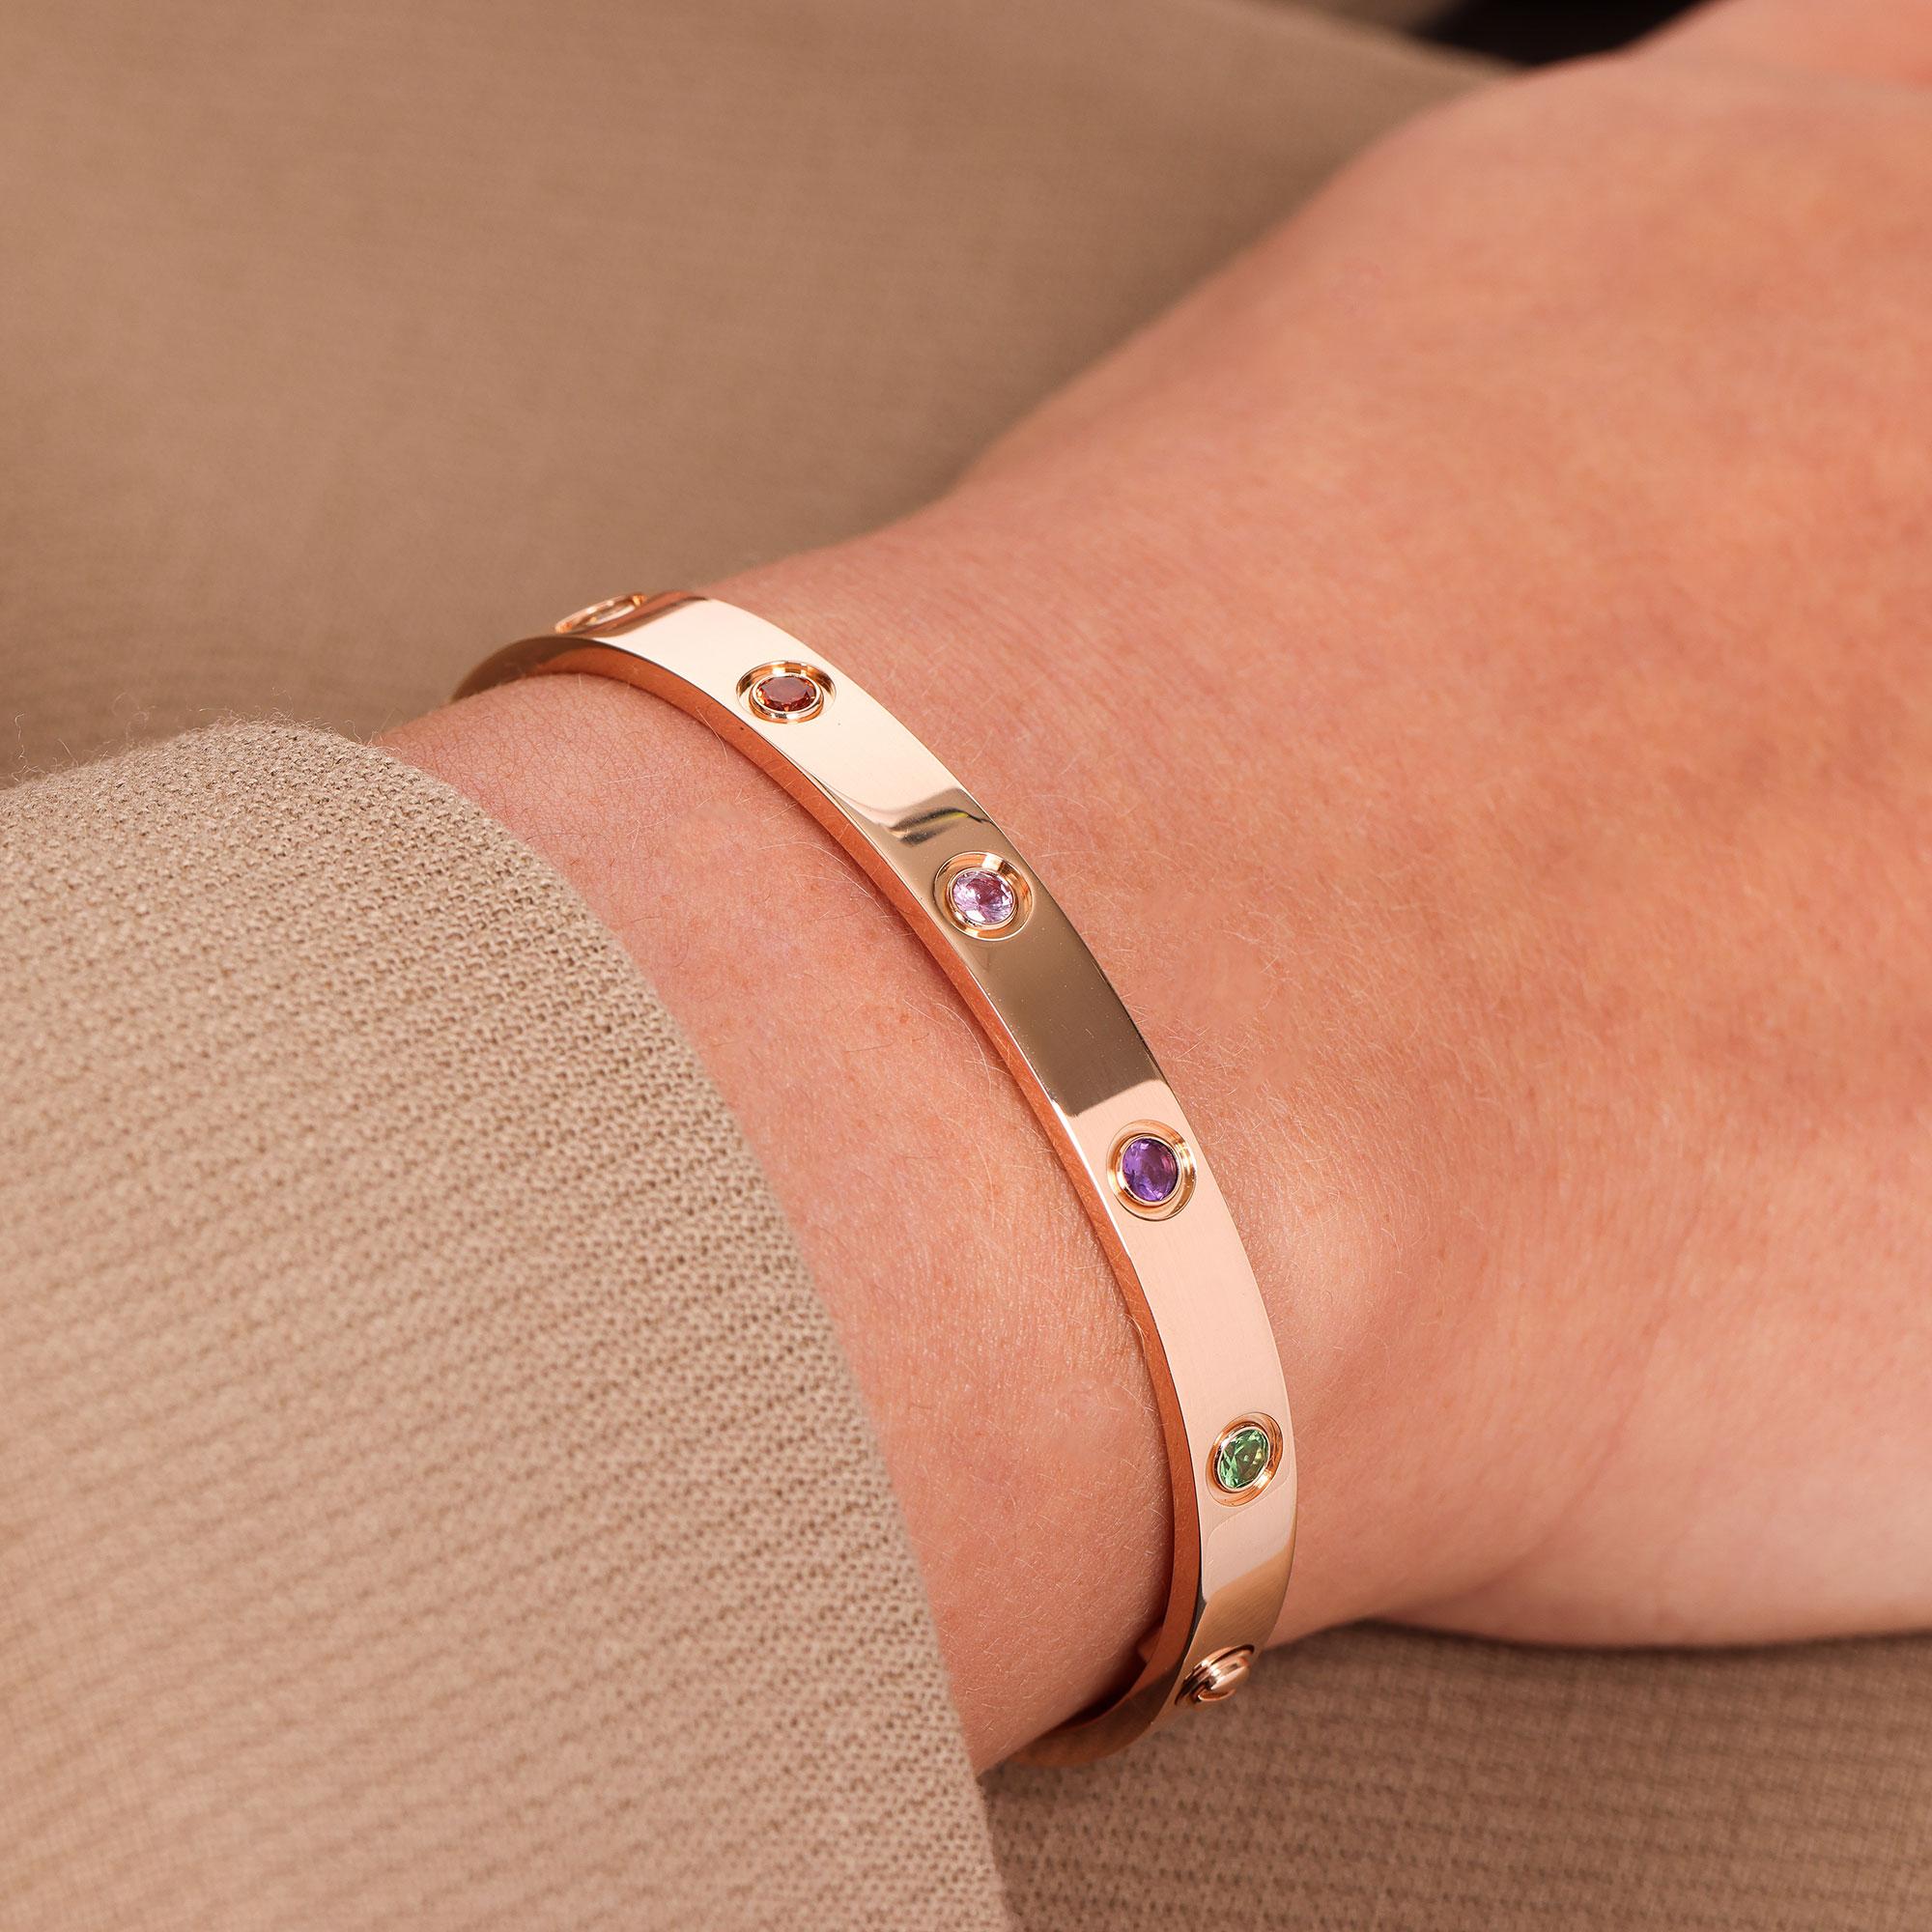 This bracelet by Cartier is from their Love collection and features a combination of gemstones. There are 2 pink sapphires, 2 yellow sapphires, 2 green garnets, 2 orange garnets and 2 amethysts all set in 18ct rose gold. It is a Cartier size 17 and